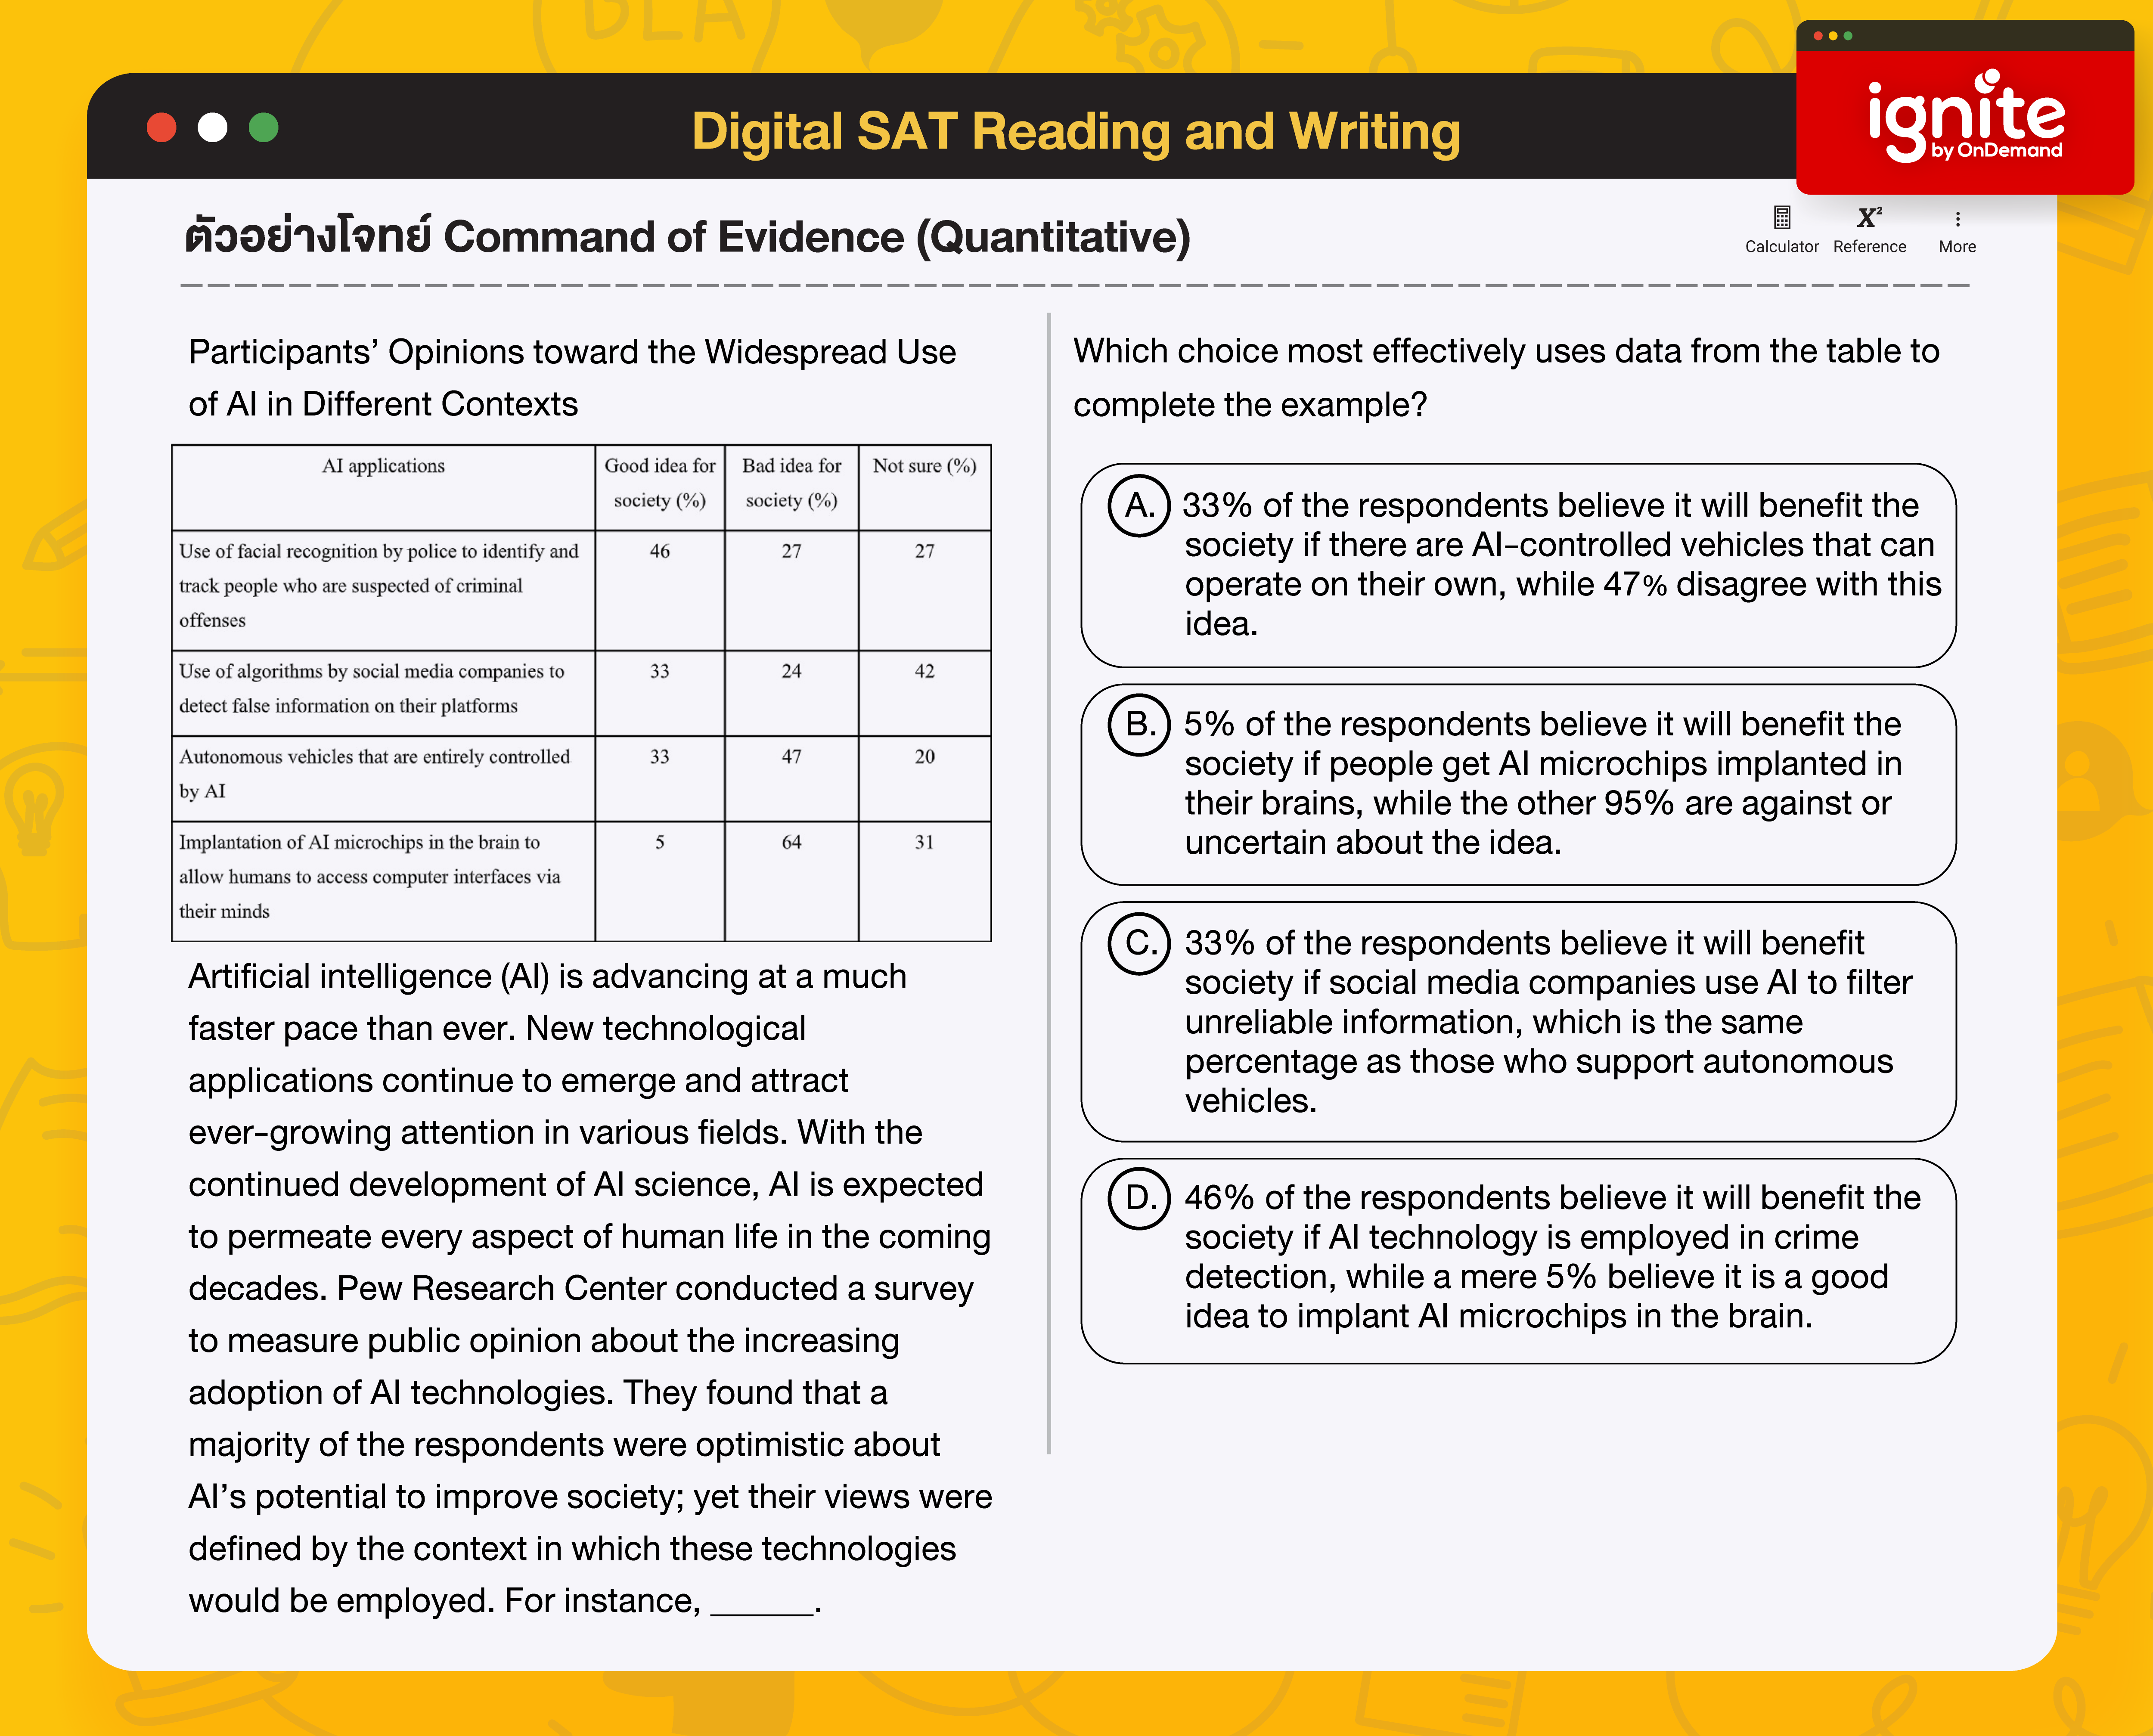 Command of Evidence 2 - Digital SAT Reading and Wrting 2023 - ignite by OnDemand